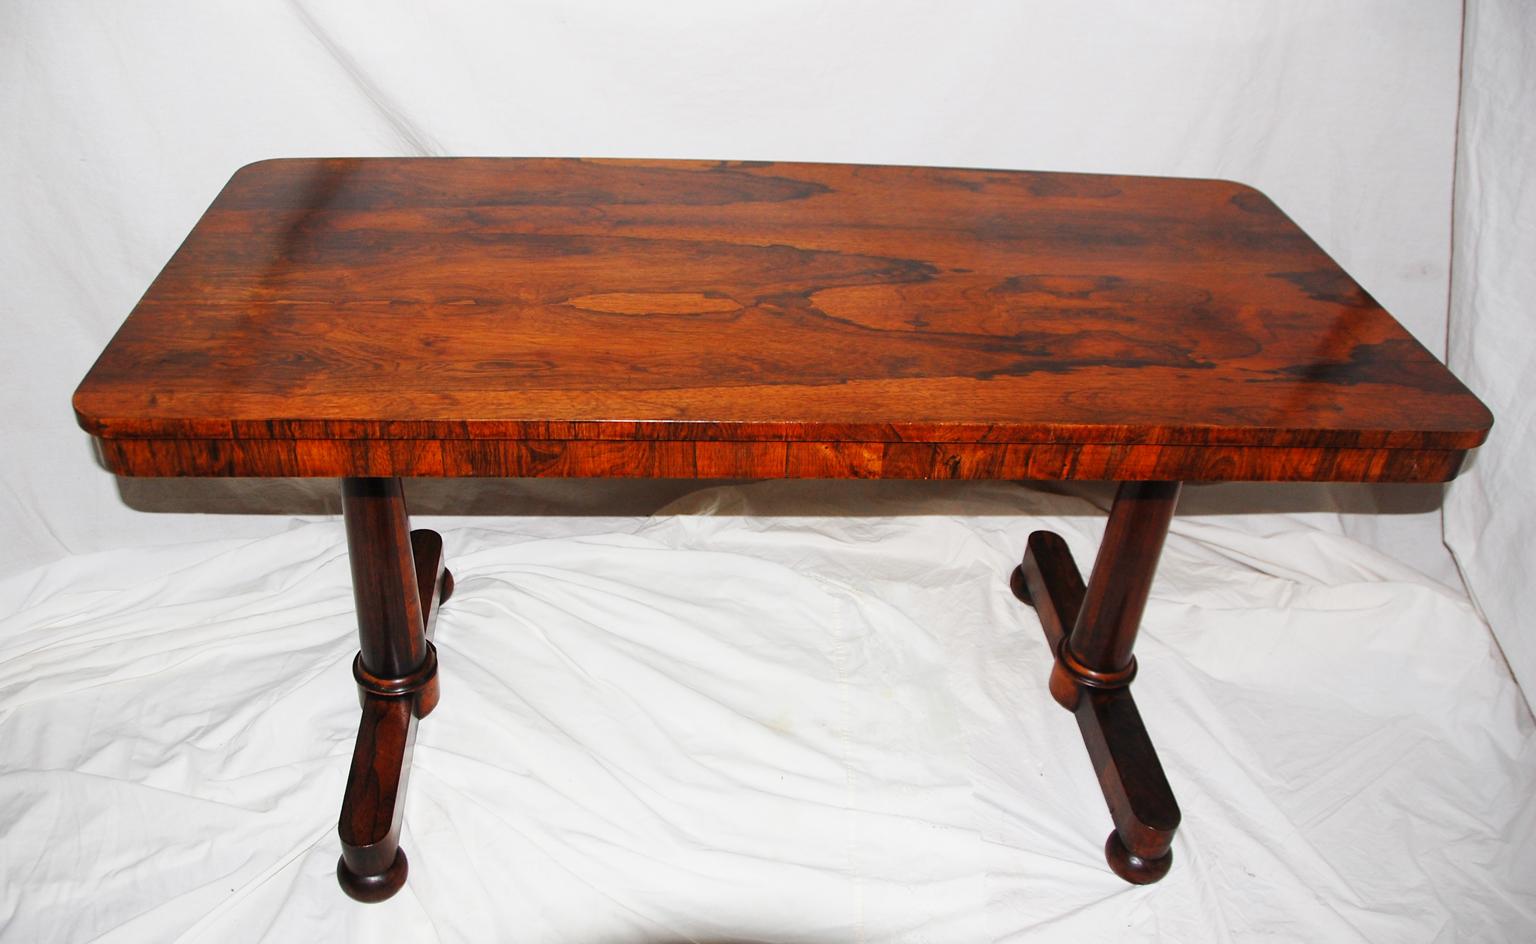 English William IV period rosewood library table with tapered pedestal ends and bun feet. The top edge is crossbanded in rosewood as is the skirting which supports the top. At 54 inches long and 25 1/2 inches deep it is easy to use in most rooms as